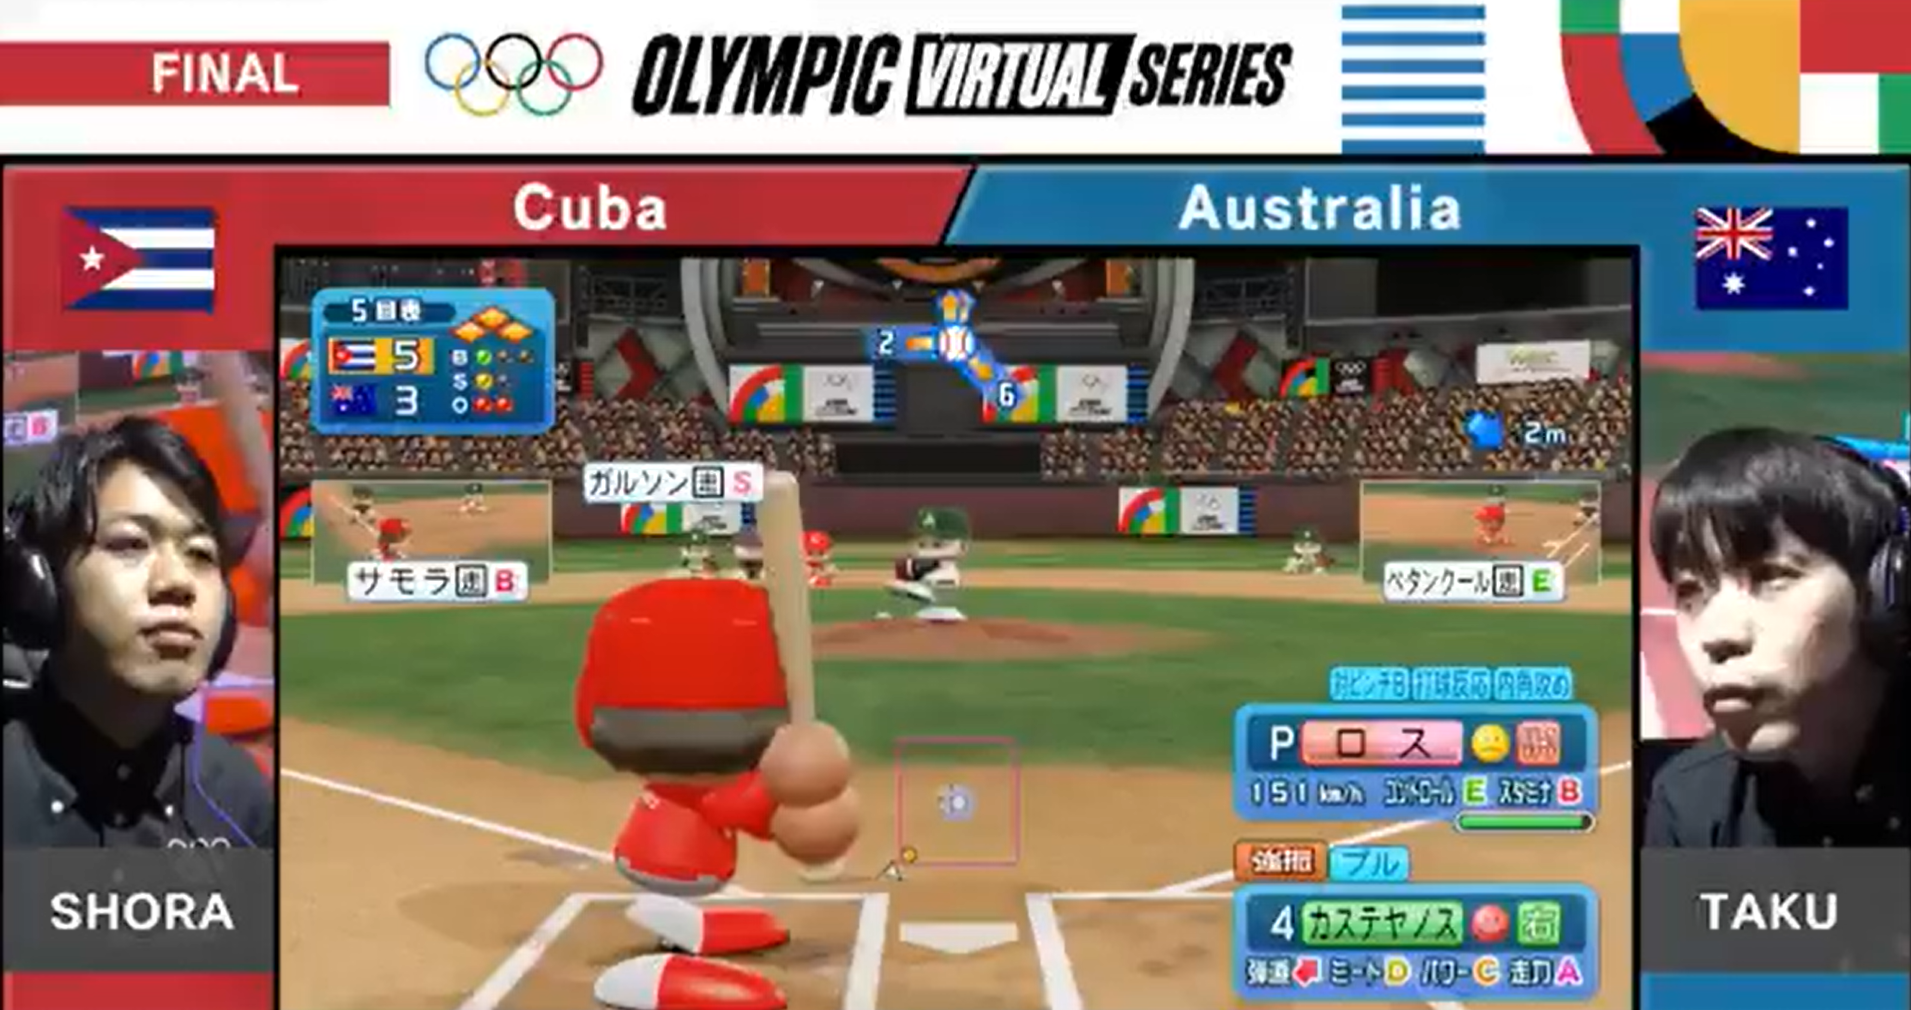 Baseball was among the sports featured in the inaugural Olympic Virtual Series ©Twitter/WBSC 